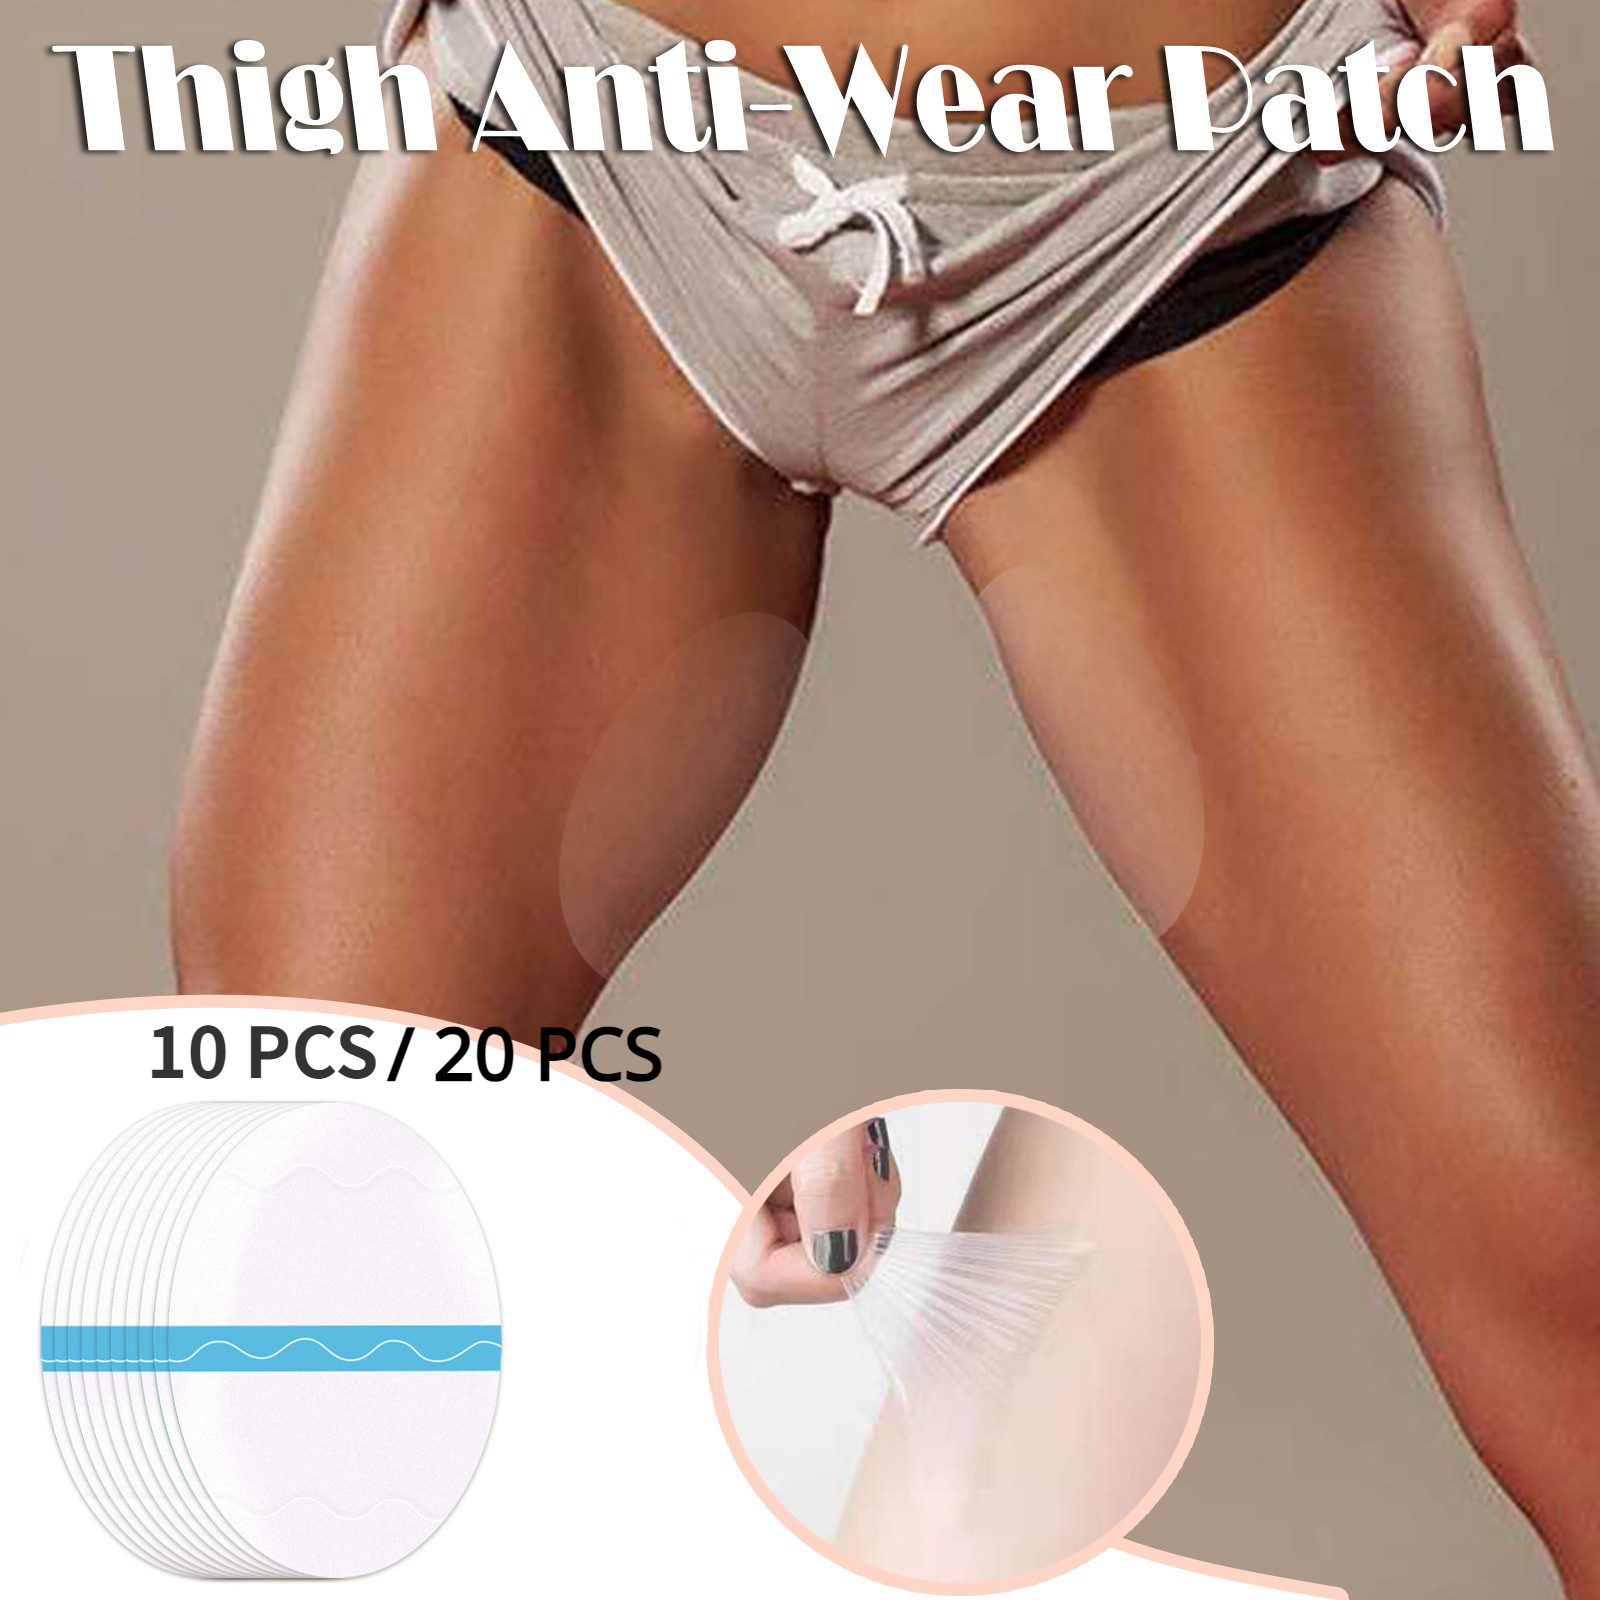 Thigh Sticker Chafing InnerThigh Paste Wear TapeChafing Chafing Pads Body  for Thigh Thigh PasteBody Bands Friction 